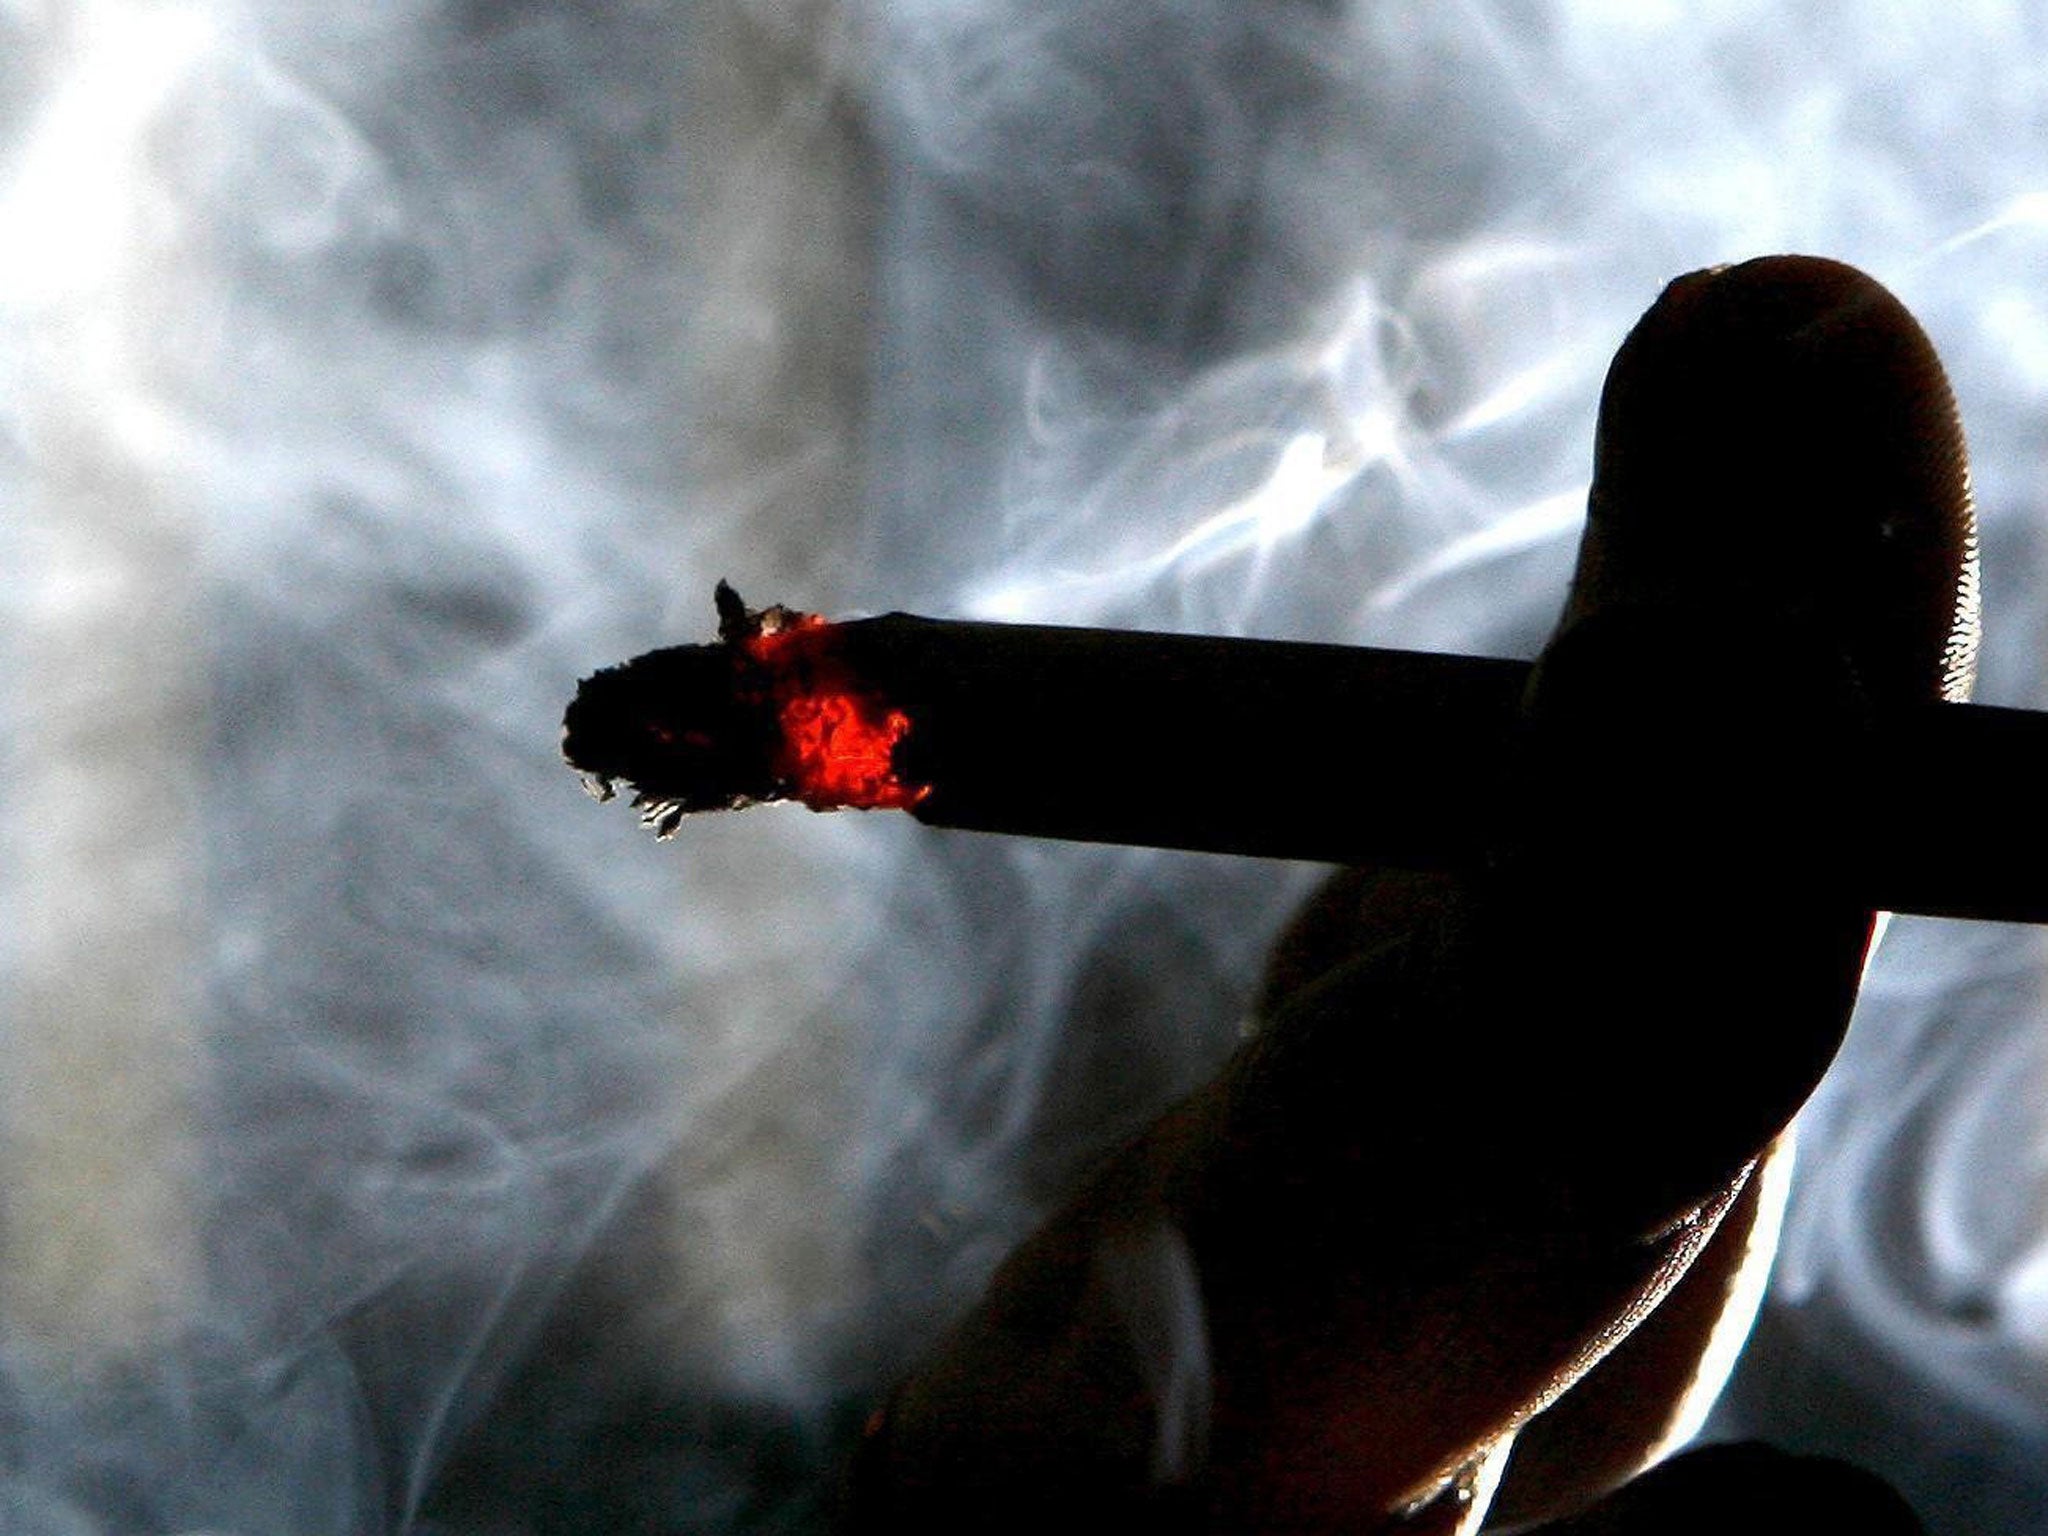 Smoking could be a sign of psychiatric illness